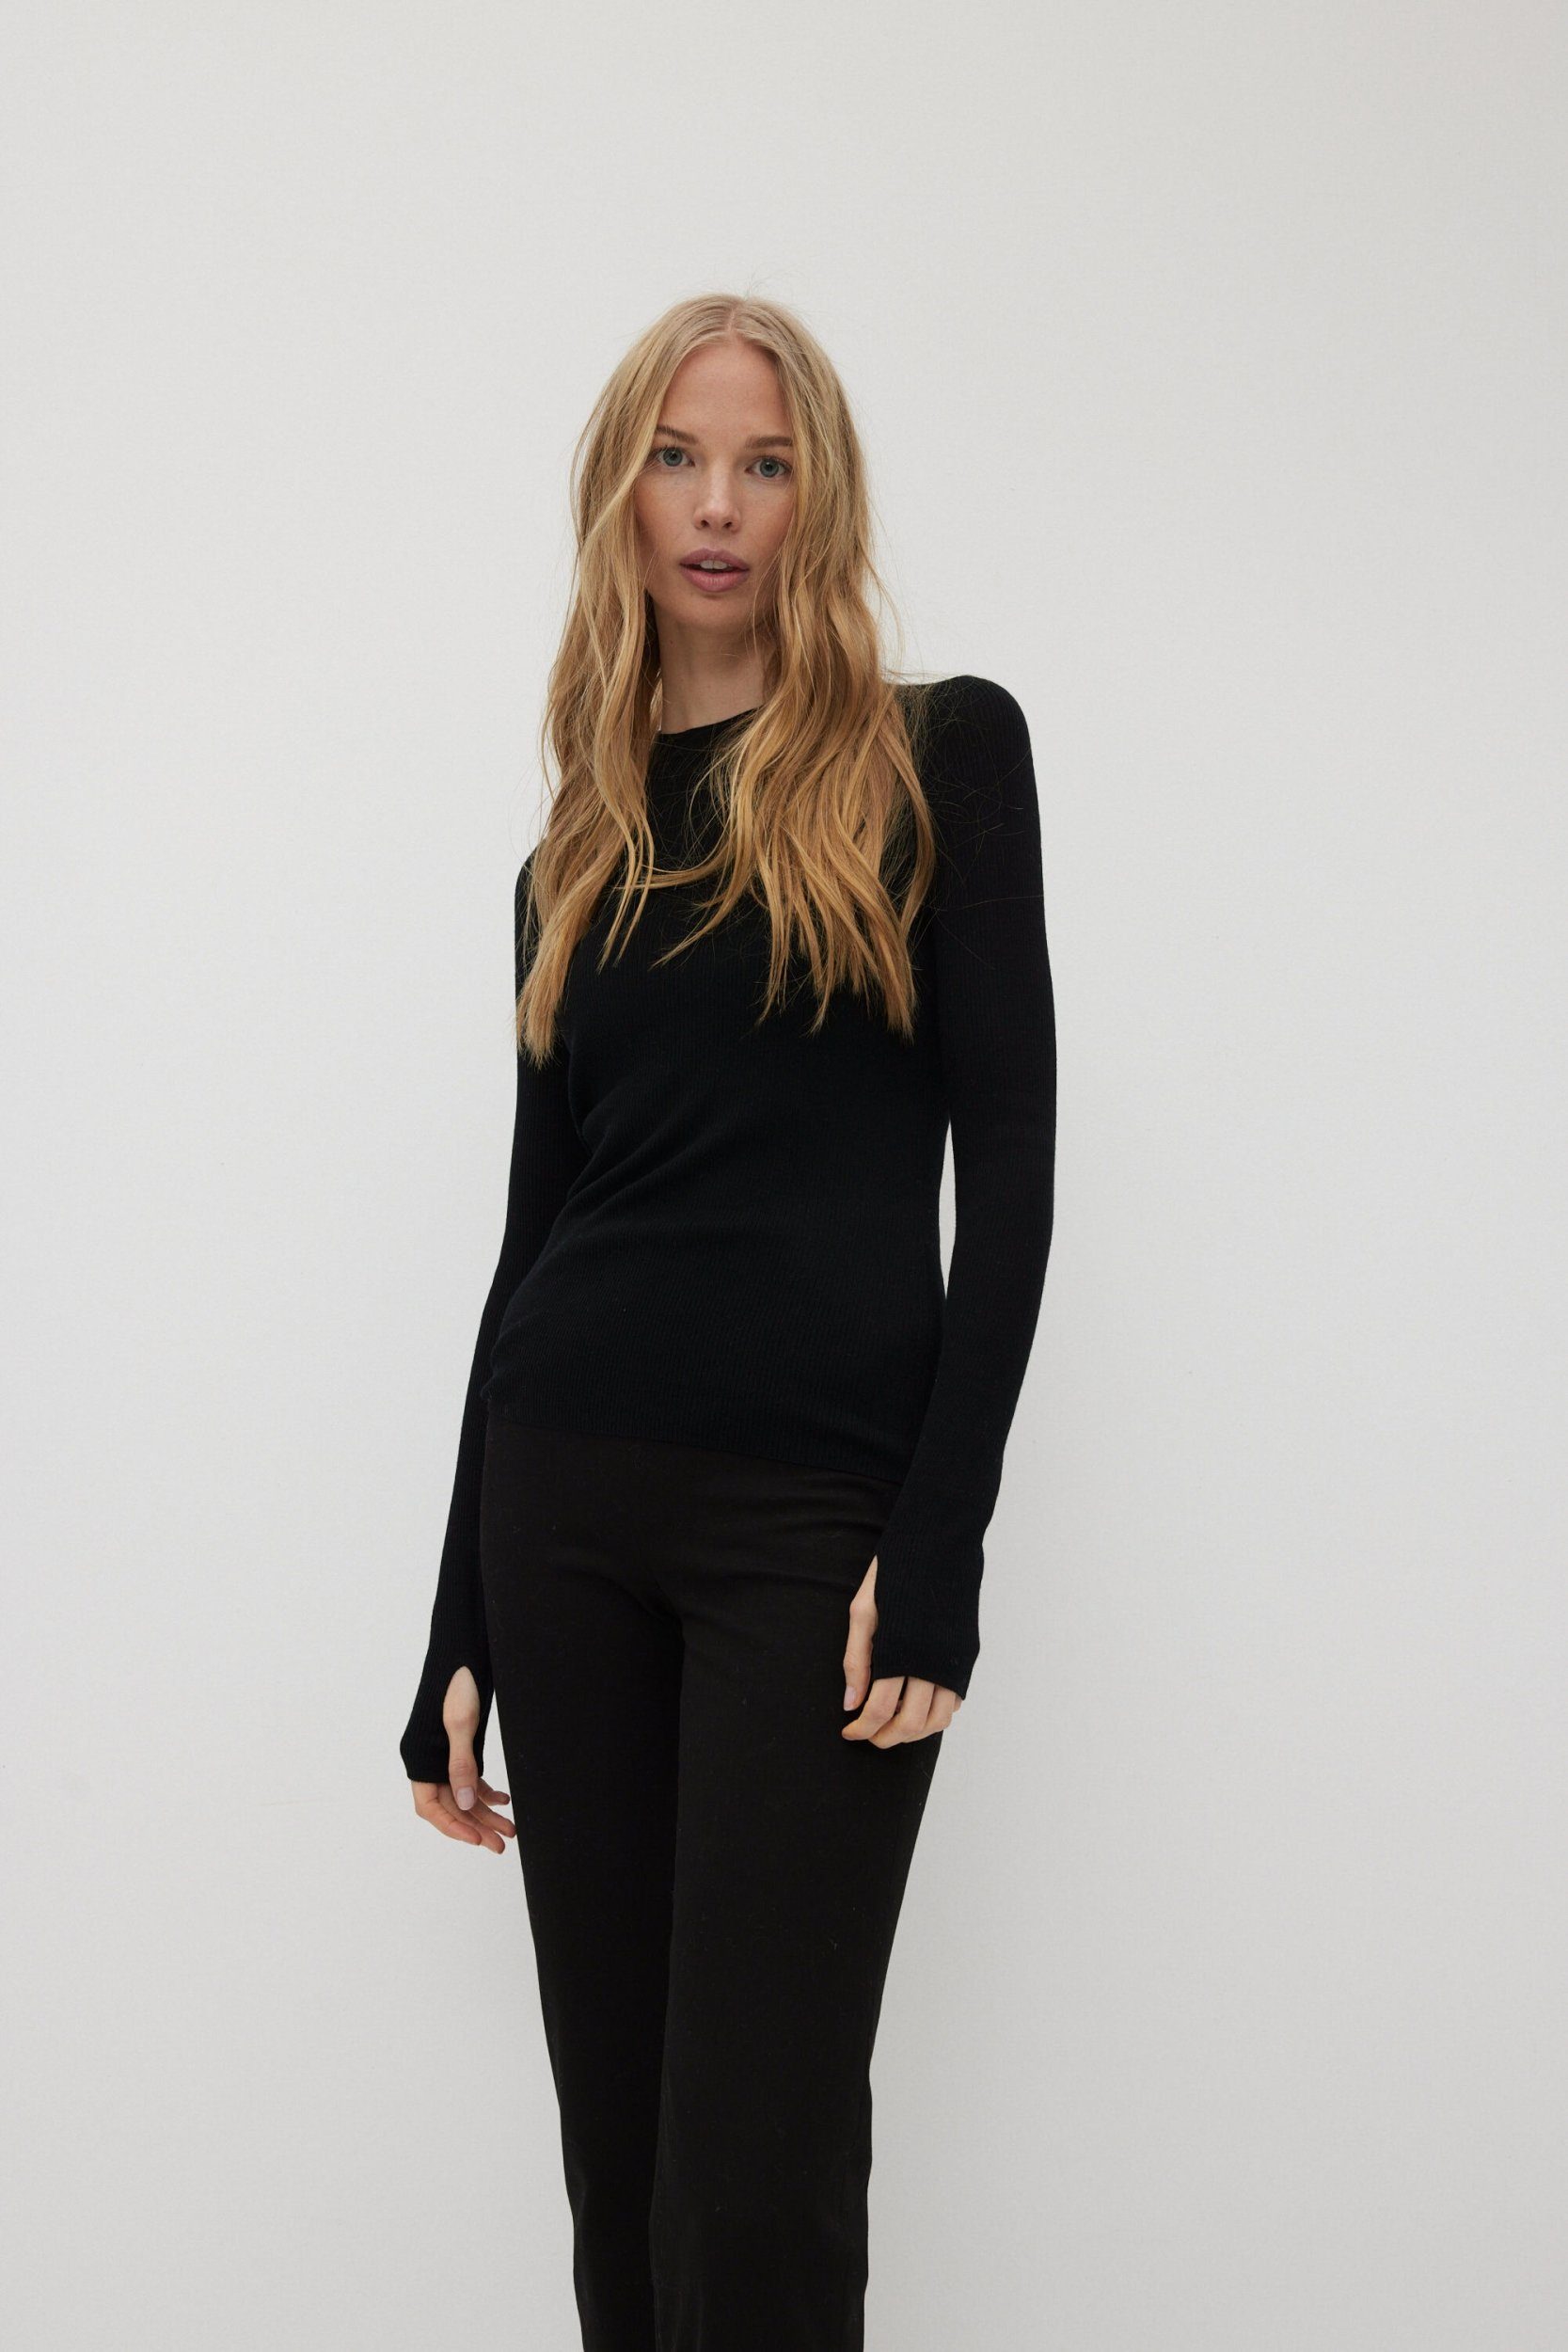 Rundhalspullover DEEP BLACK Turtleneck, FASHION PEOPLE CHECK knitted THE Basic